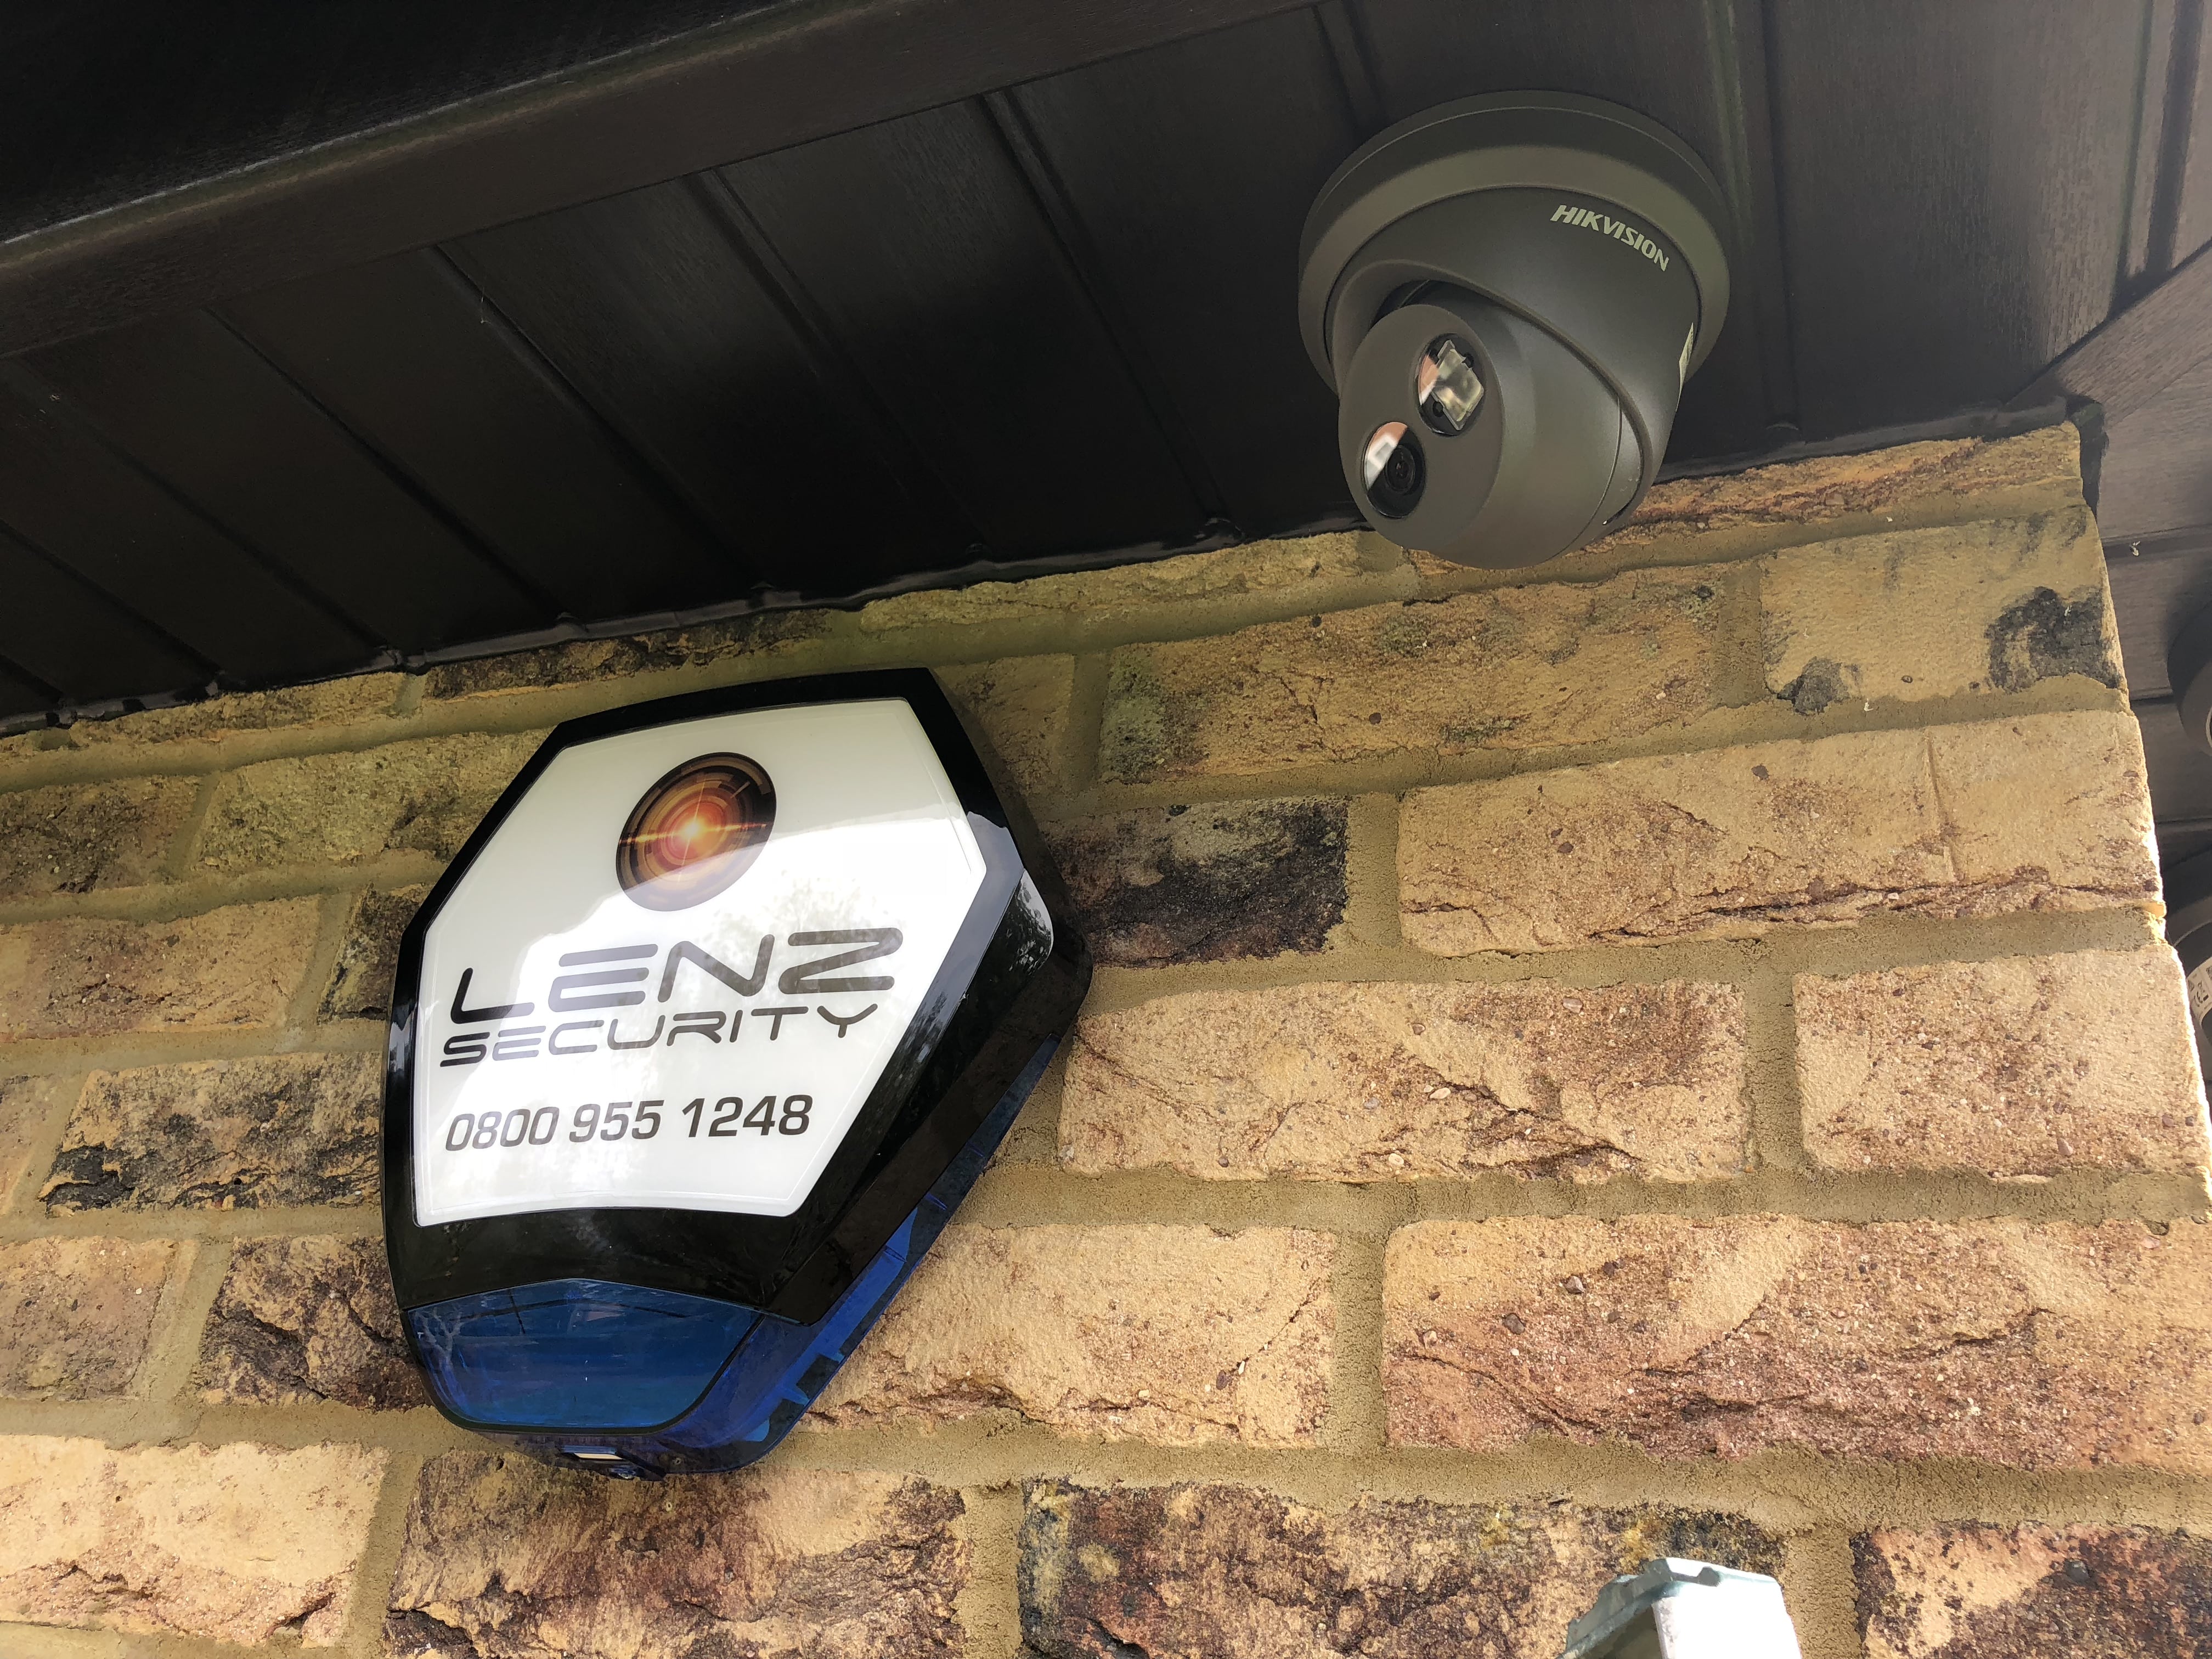 Commercial Security | Black HikVision Camera | Security Alarm | Lenz Security